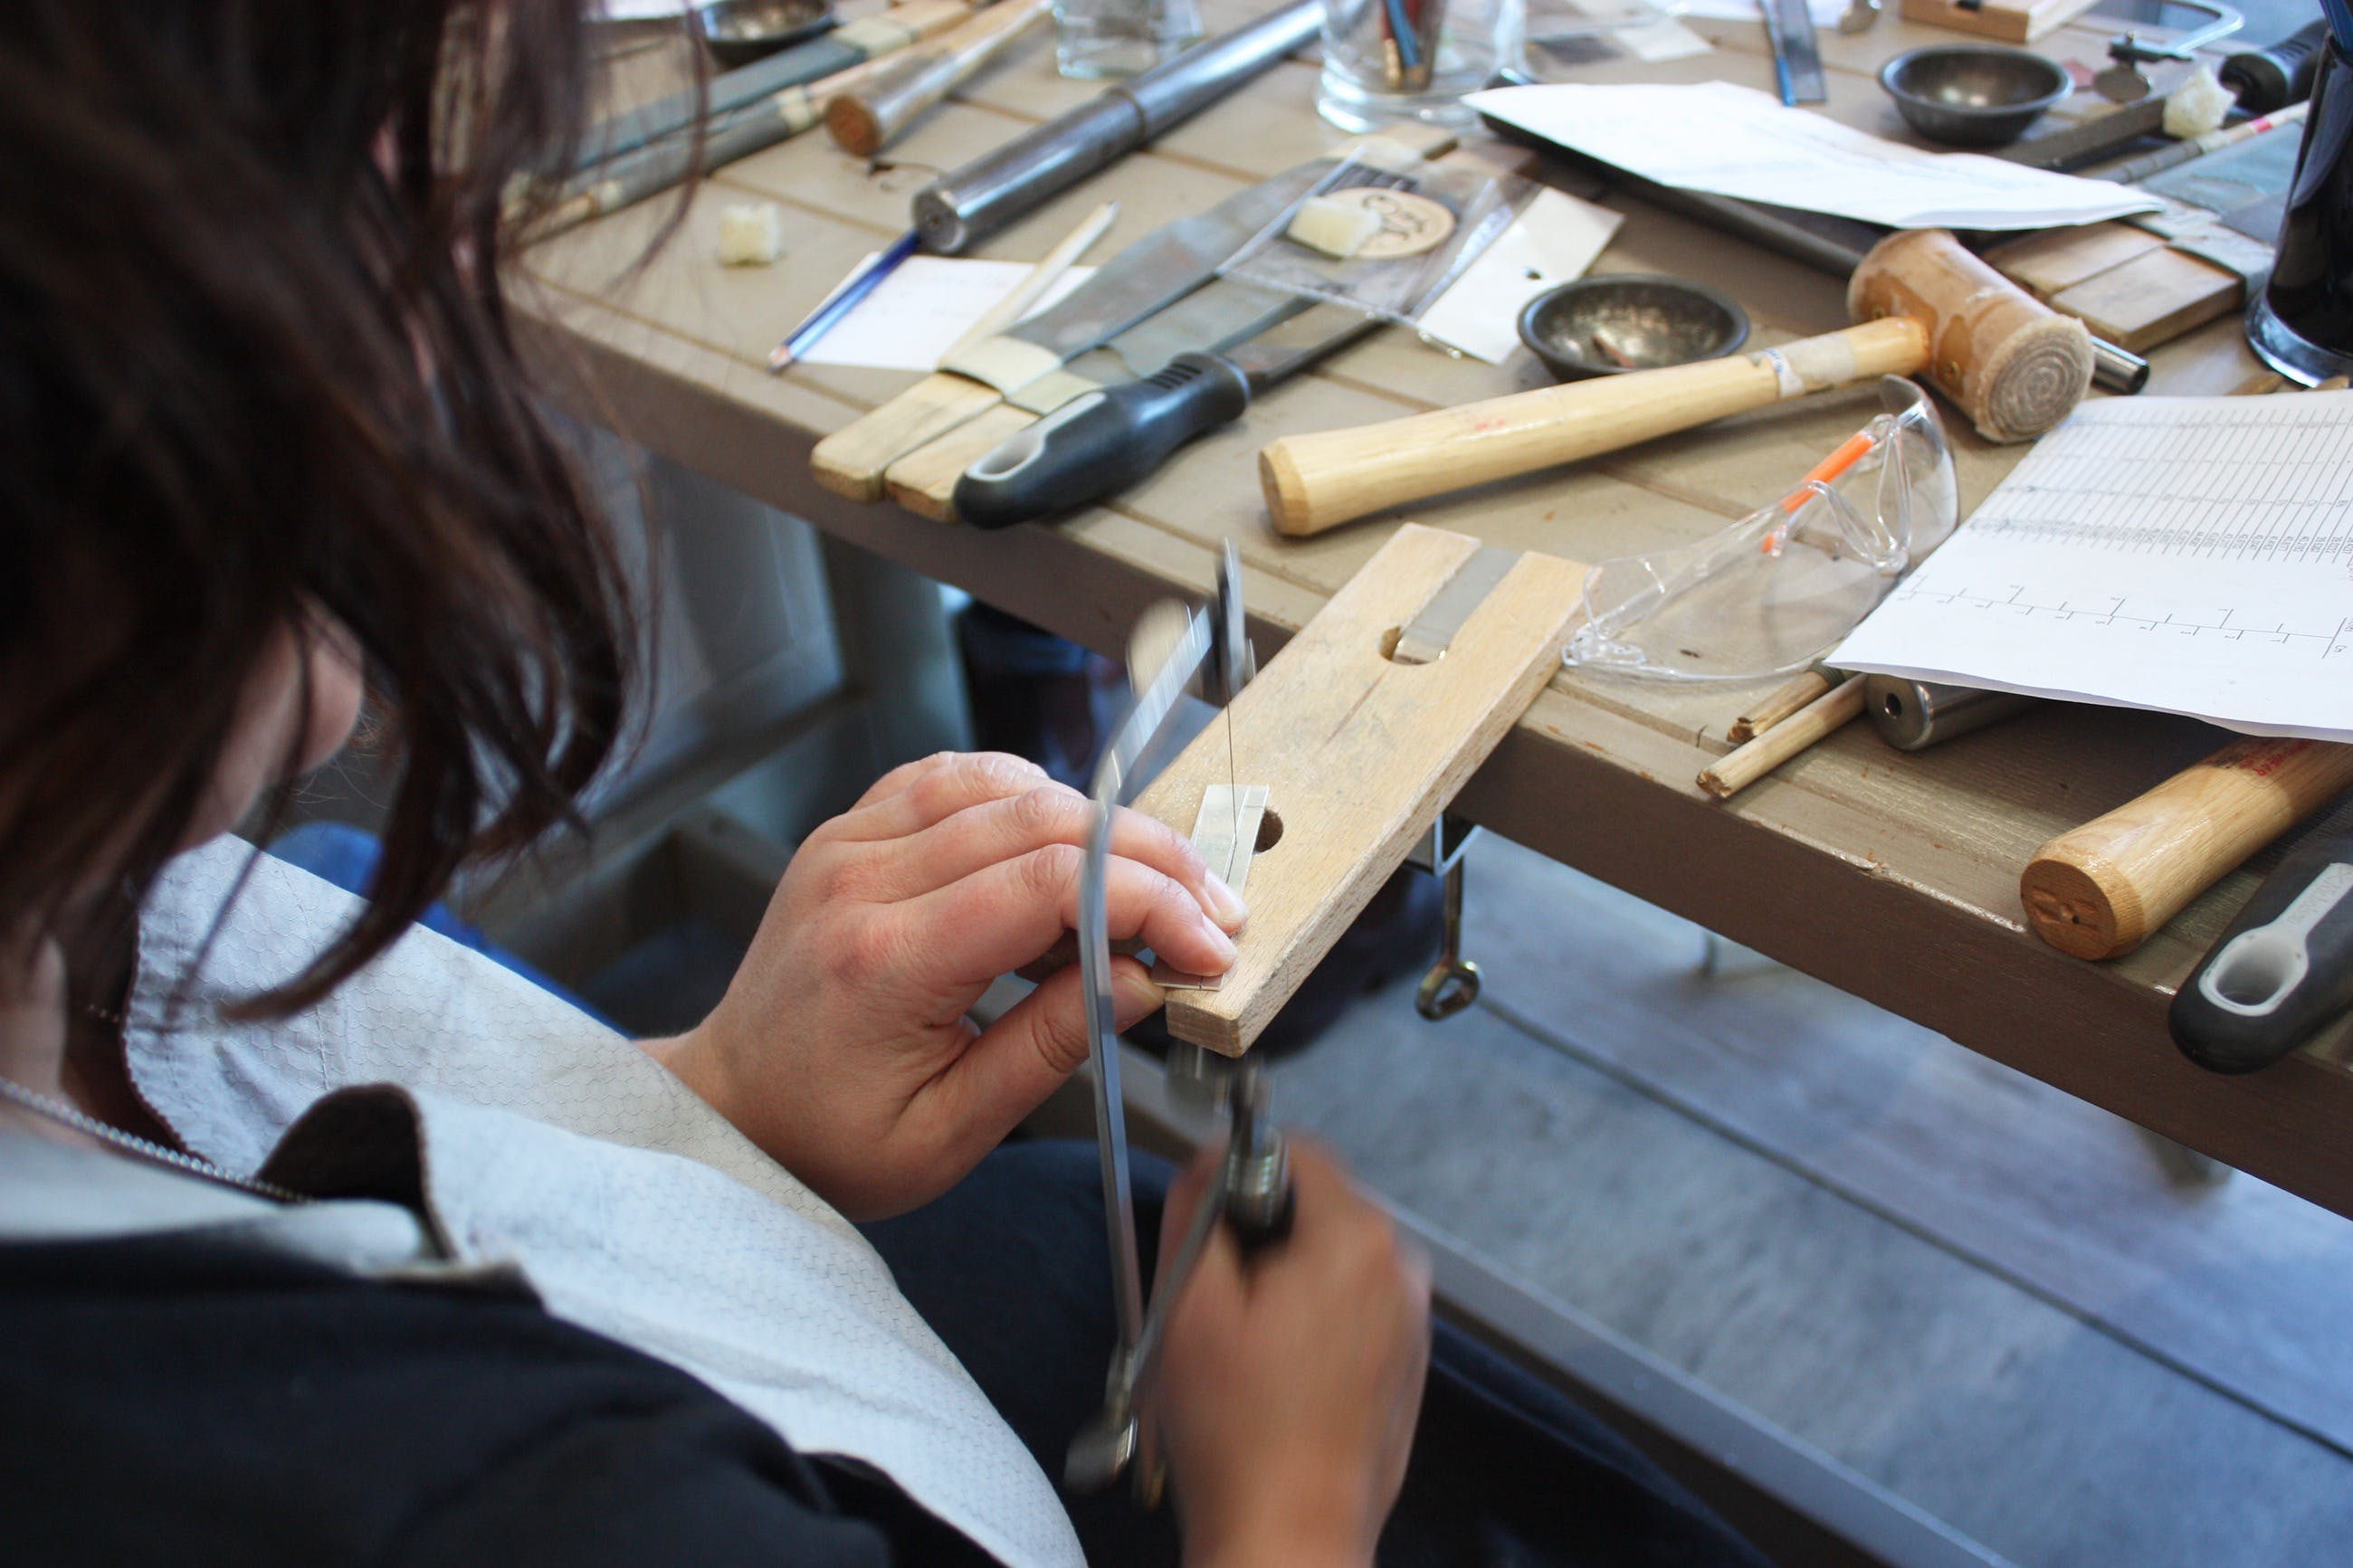 Silver smith Workshops- Make your own sterling silver jewellery